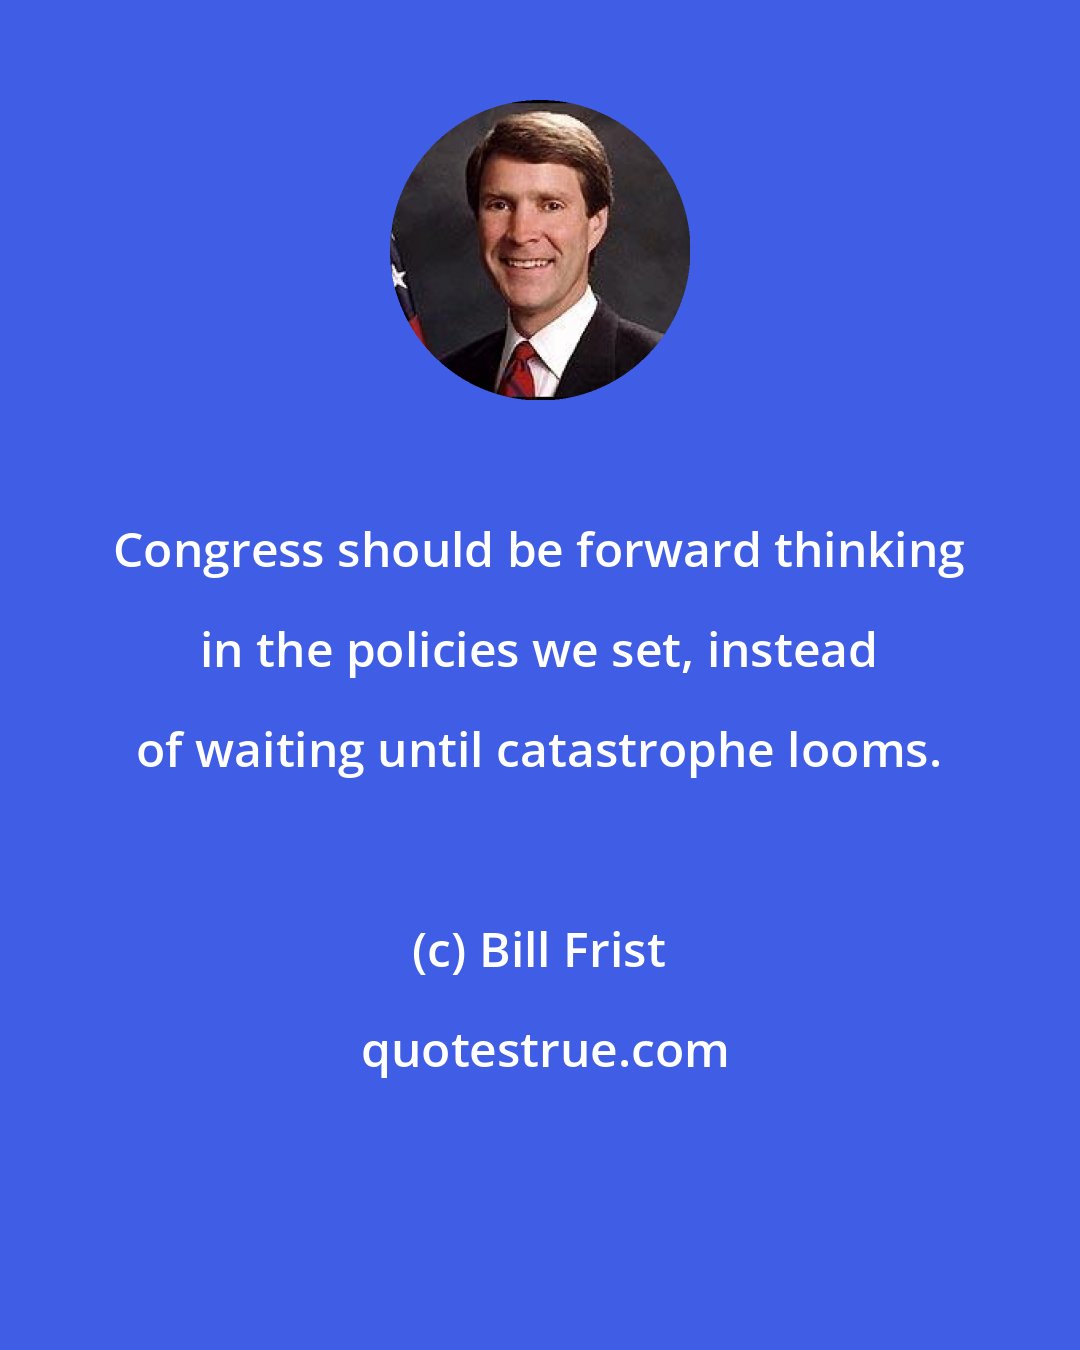 Bill Frist: Congress should be forward thinking in the policies we set, instead of waiting until catastrophe looms.